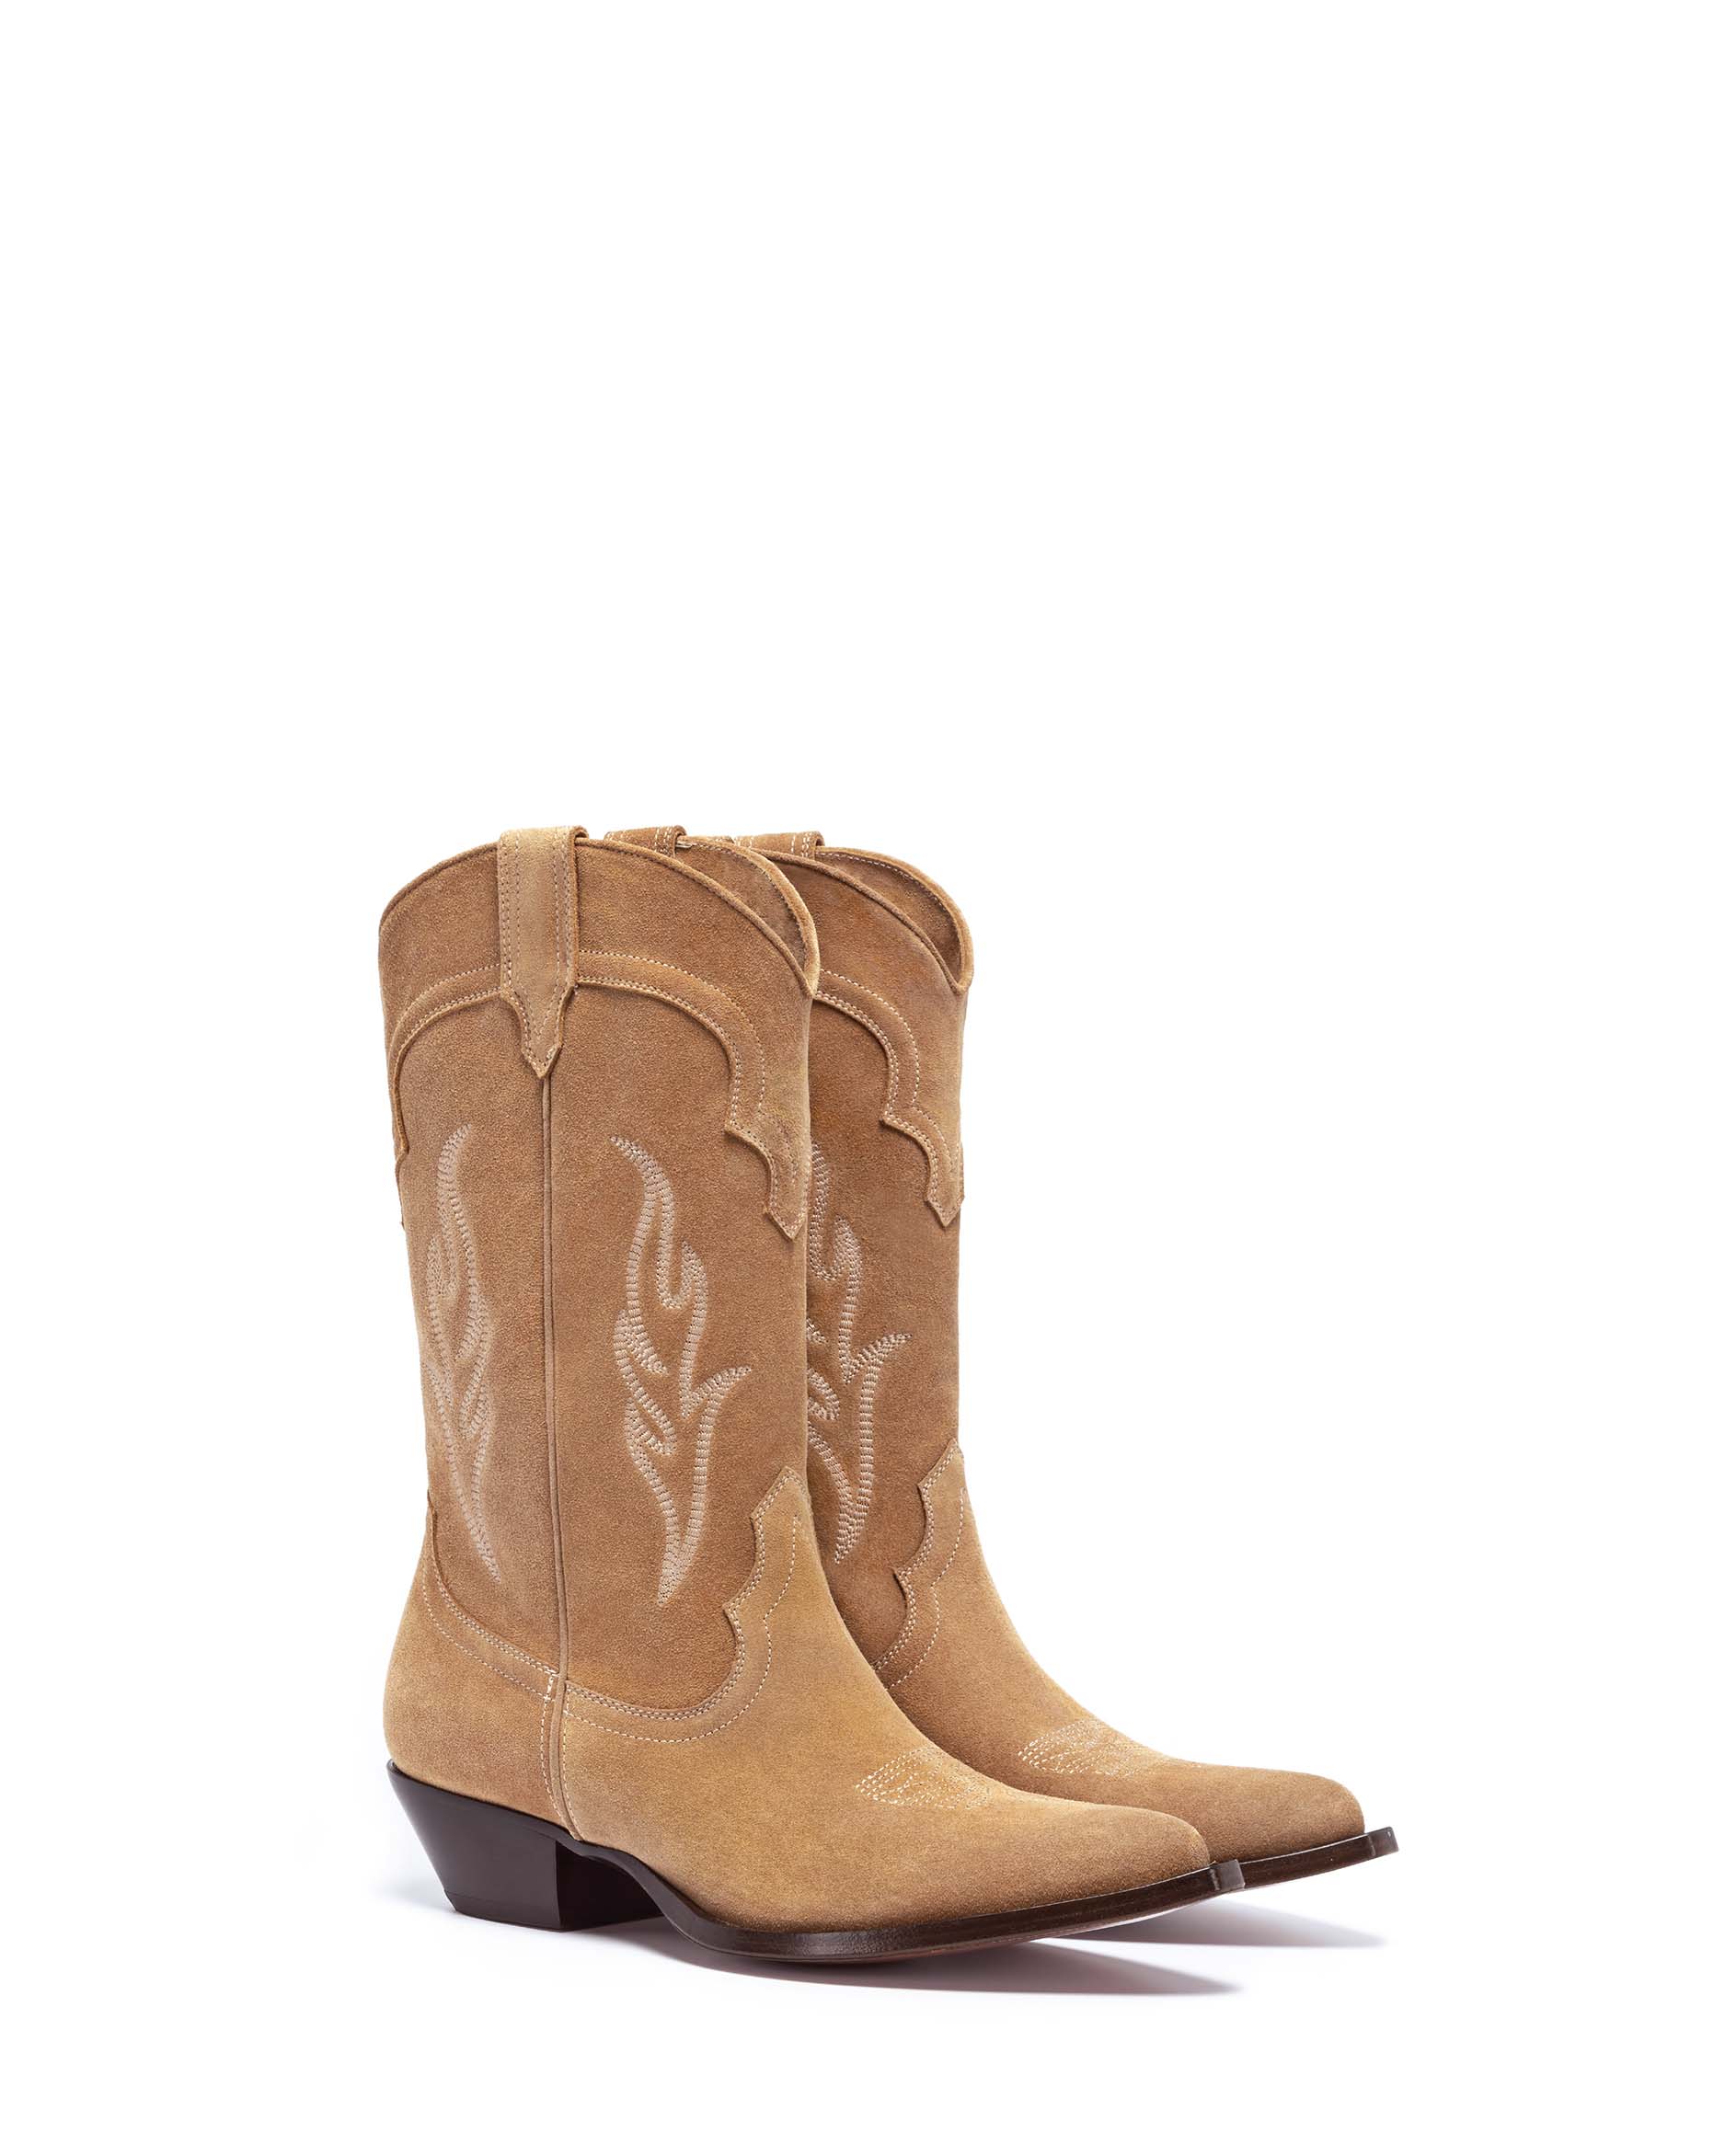 SANTA FE Men's Cowboy Boots in Cognac Suede | Off-White Embroidery_Front_02